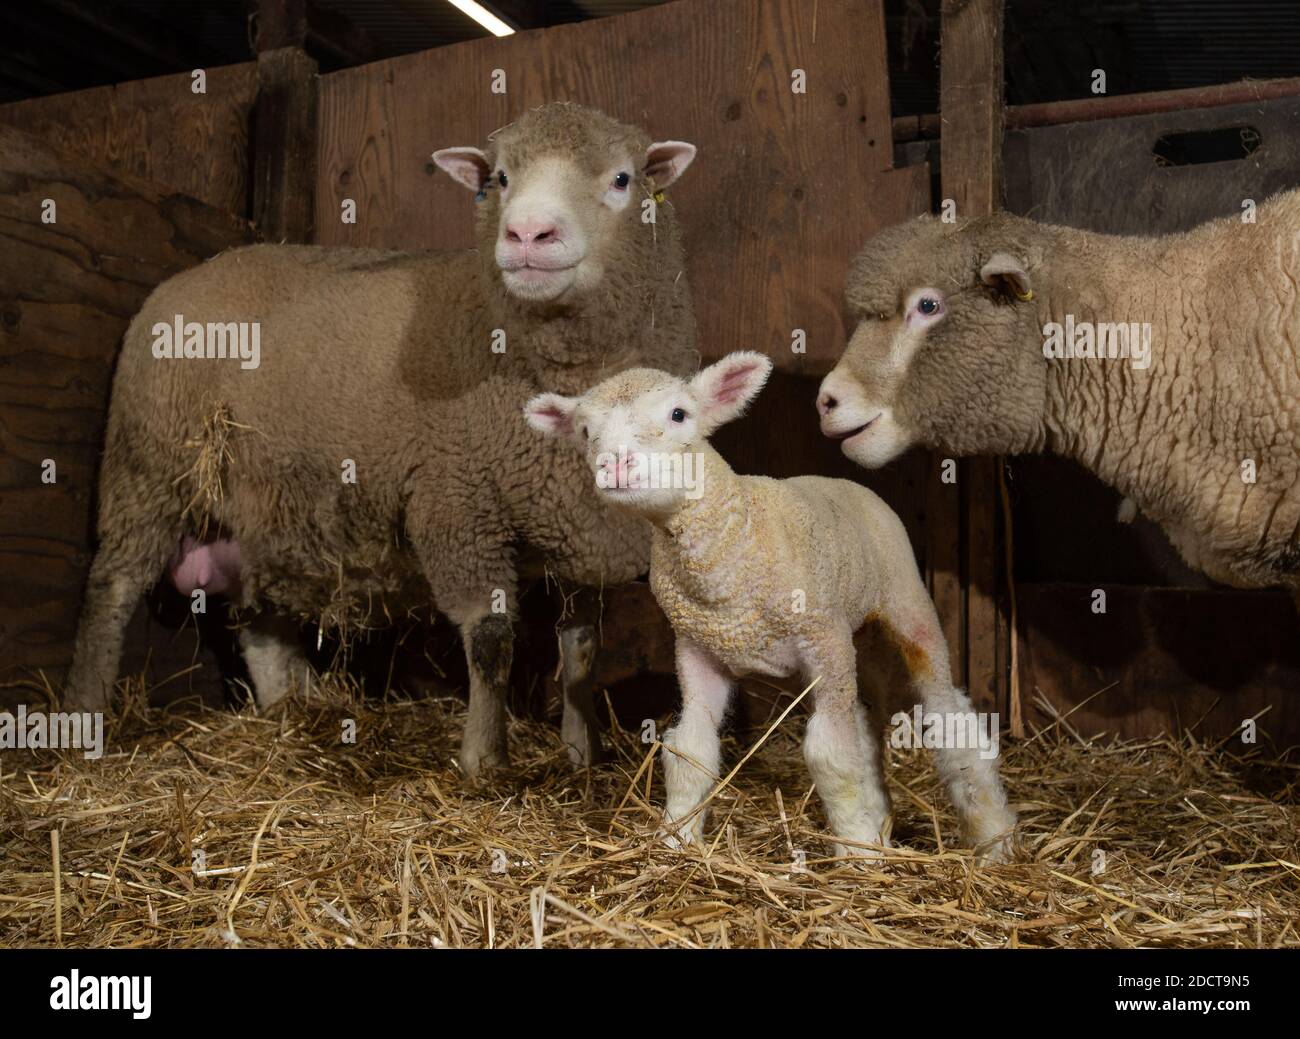 Preston, Lancashire, UK. 23rd Nov, 2020. Poll Dorset ewes with lambs near Preston, Lancashire, UK. The prolific sheep breed are capable of lambing all year round and can produce three crops of lambs every two years. Credit: John Eveson/Alamy Live News Stock Photo